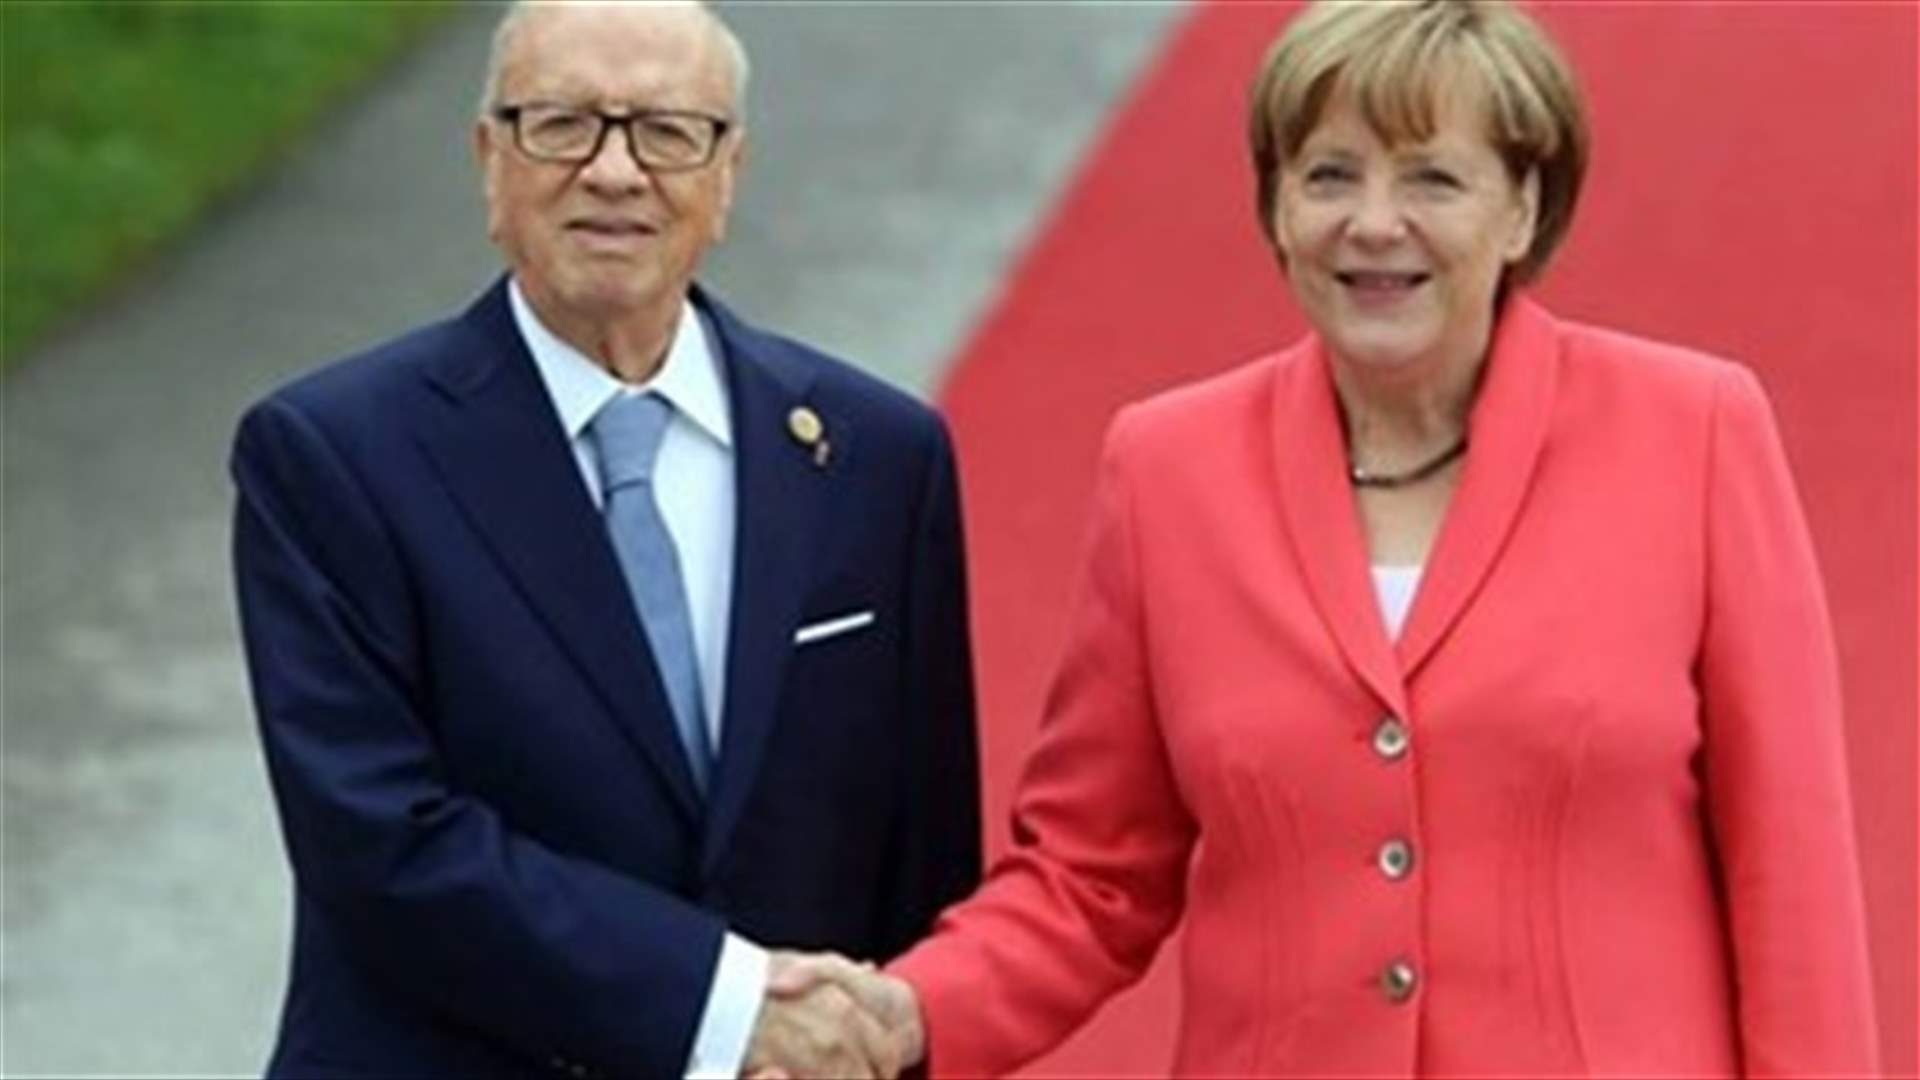 Germany and Tunisia agree on new migrant deal